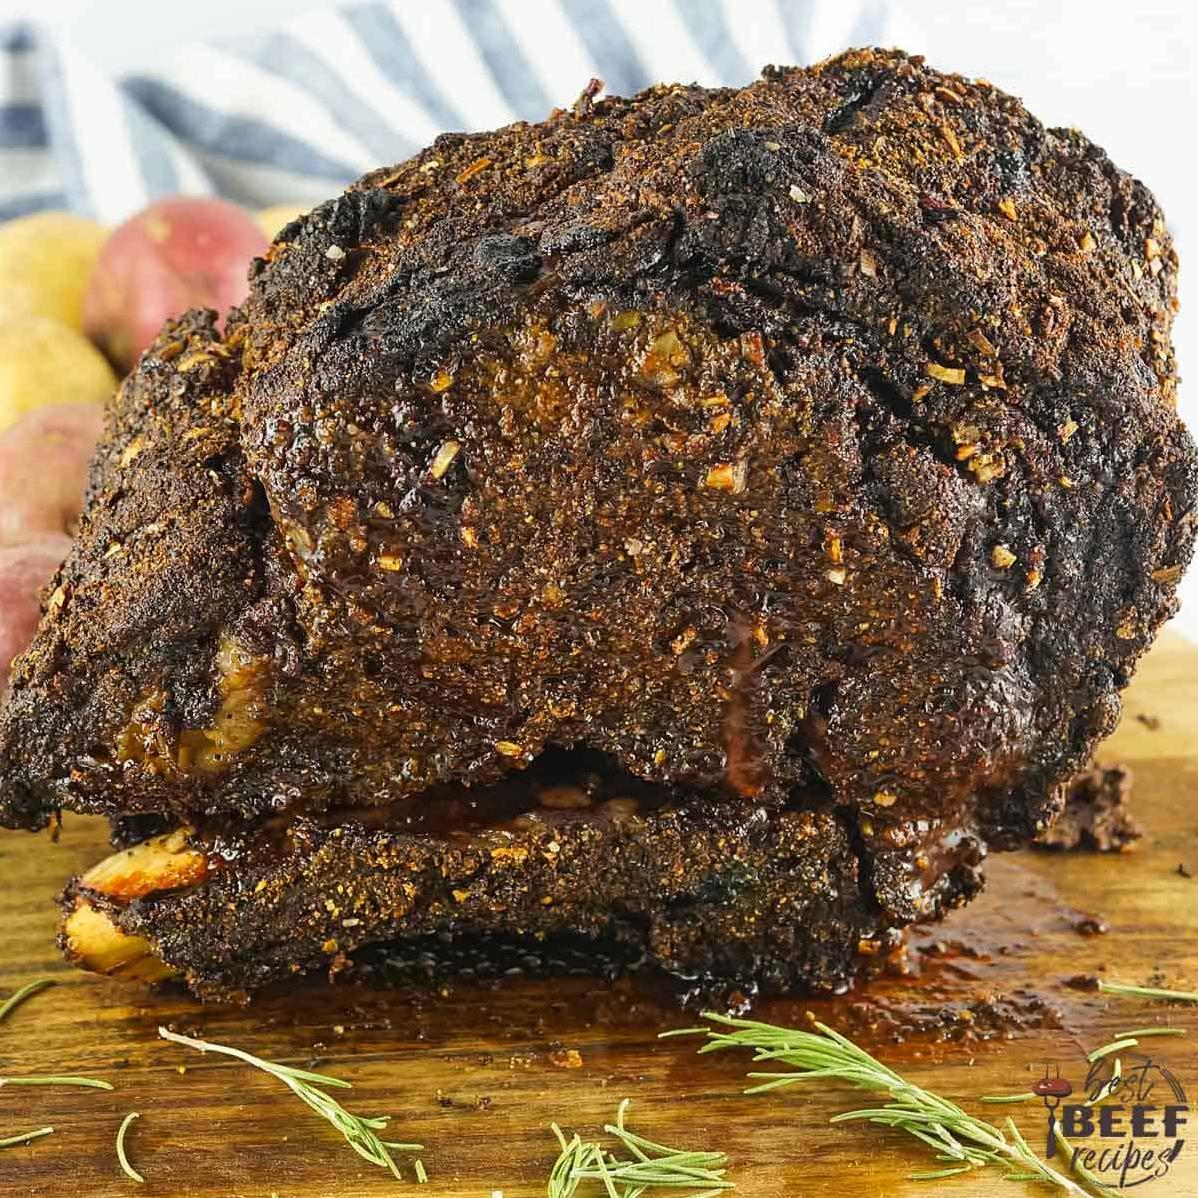  This rub is not just about adding flavor, but it also creates a mouth-watering crust on your meat.